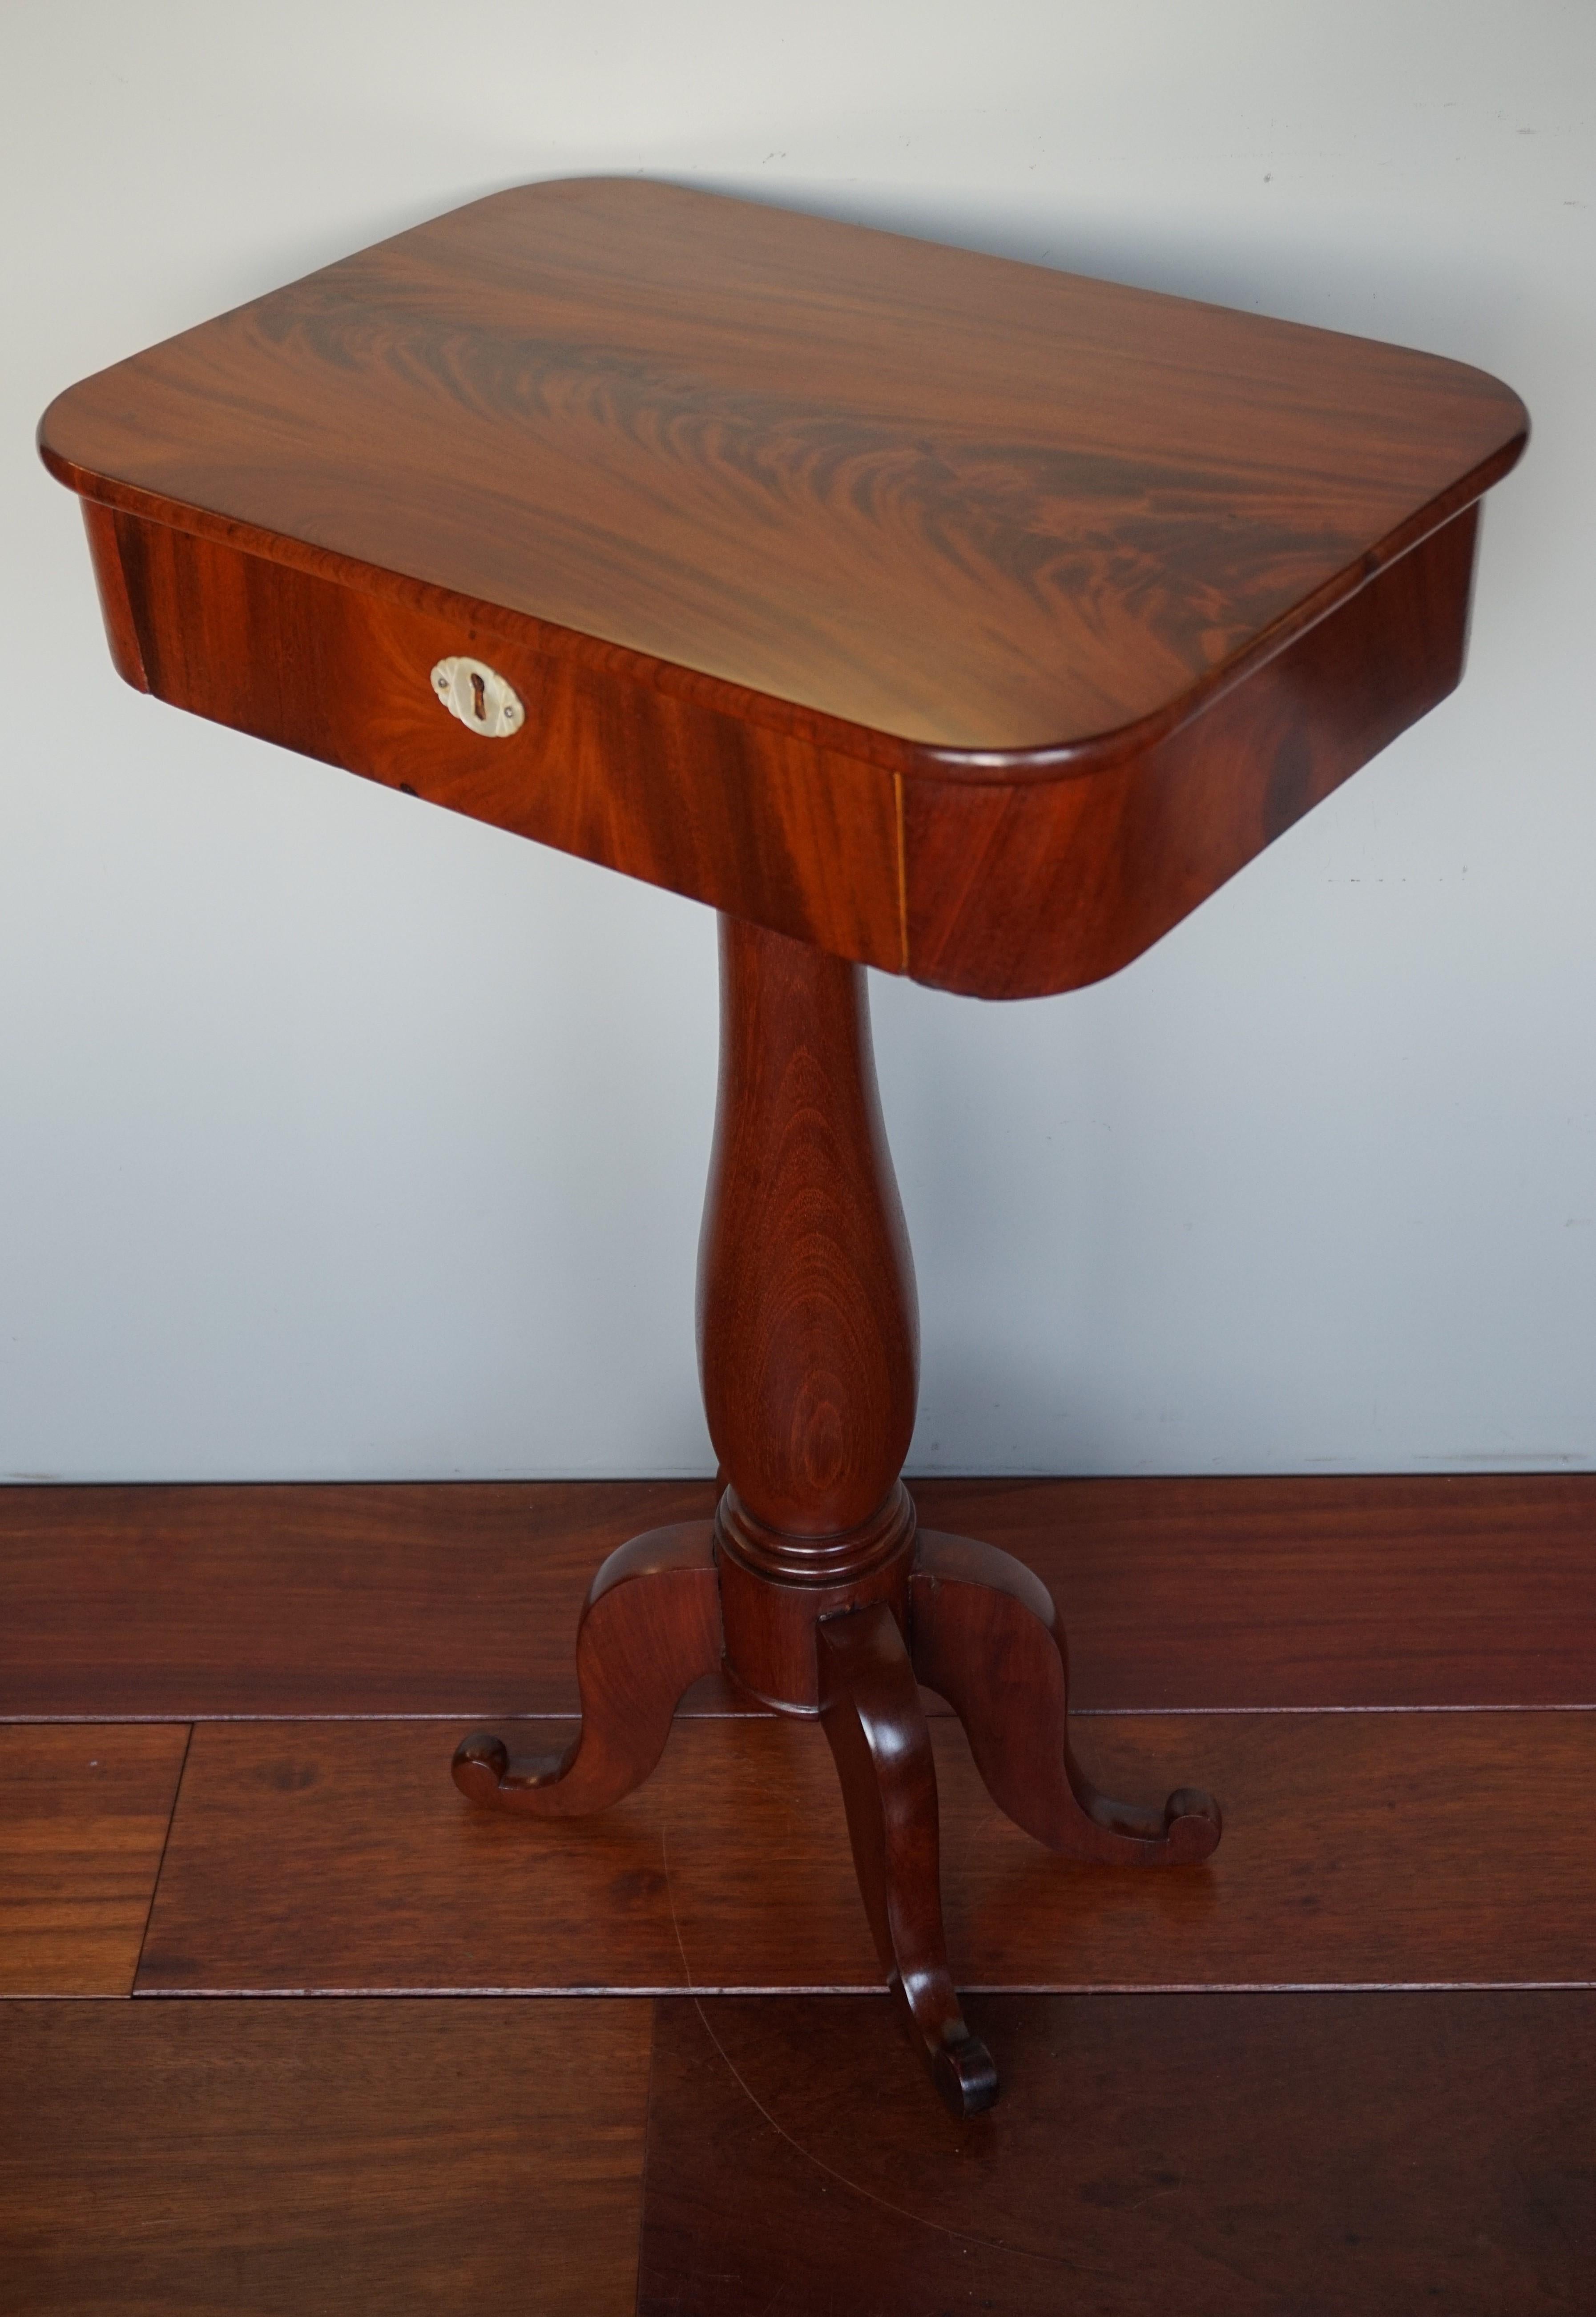 Cast Handmade Antique Nutwood Workman's Table / Sewing Cabinet / Side table w. Drawer For Sale